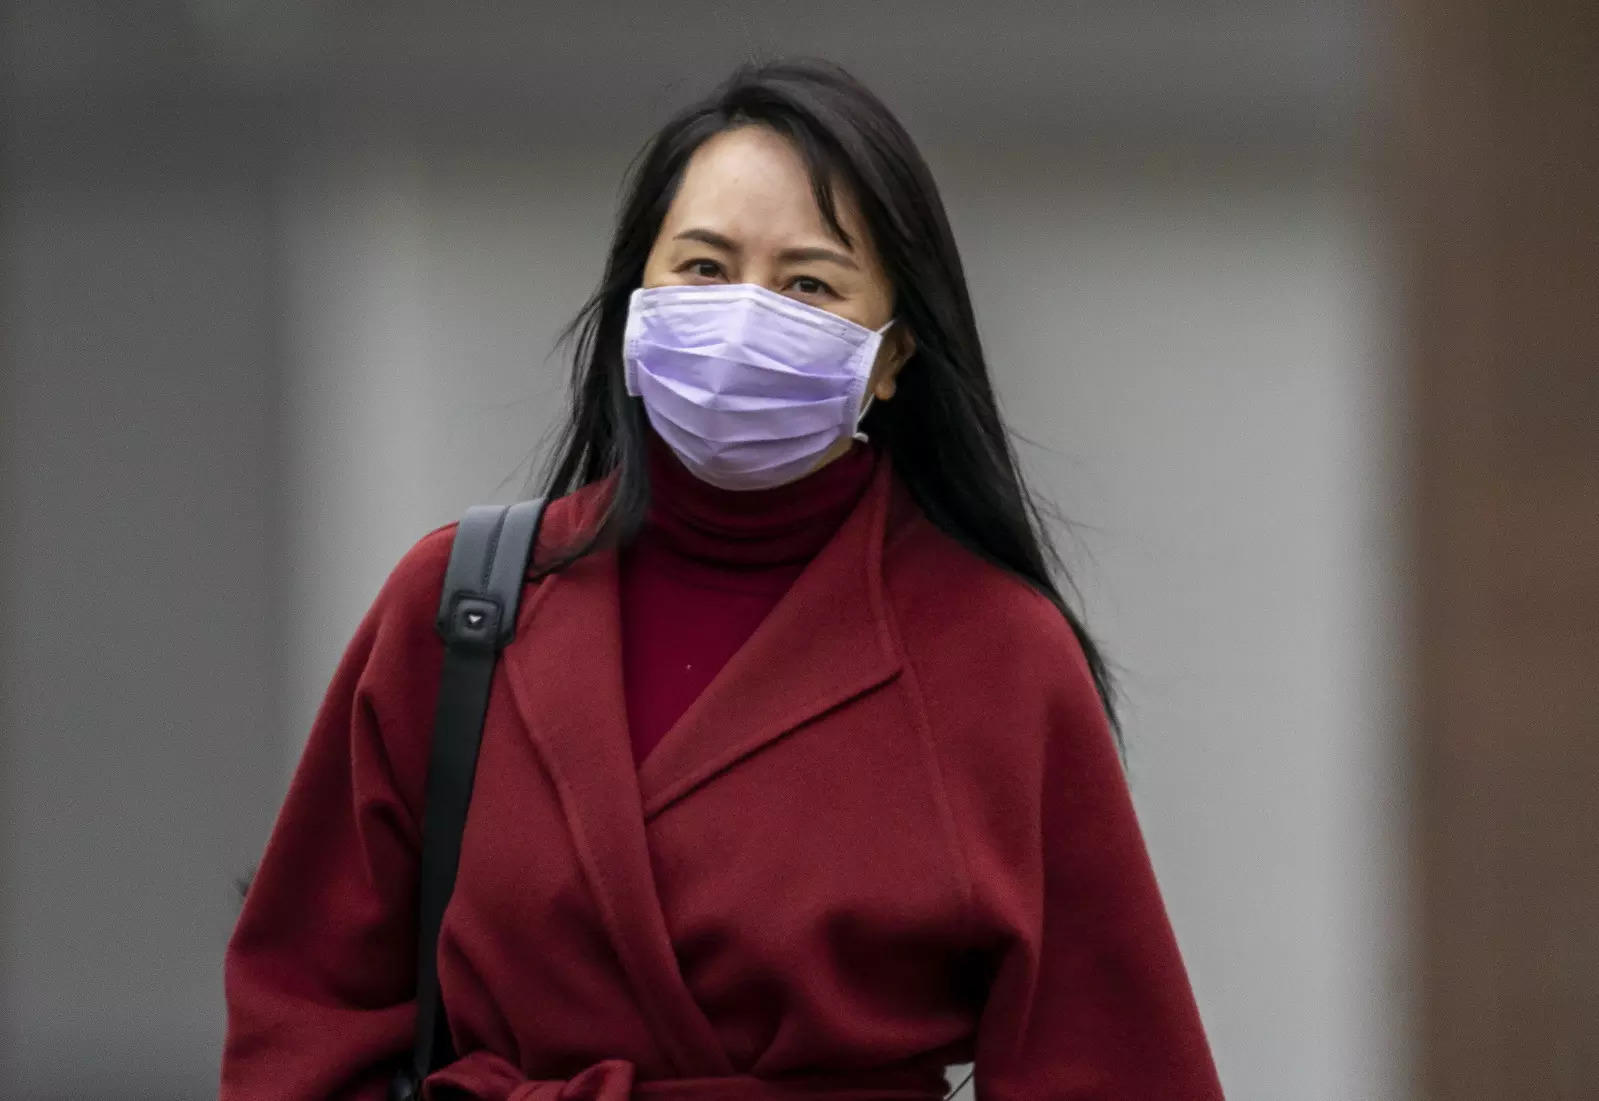 Chief Financial Officer of Huawei Meng Wanzhou leaves her home in Vancouver, Thursday, March 18, 2021. (Jonathan Hayward/The Canadian Press via AP)